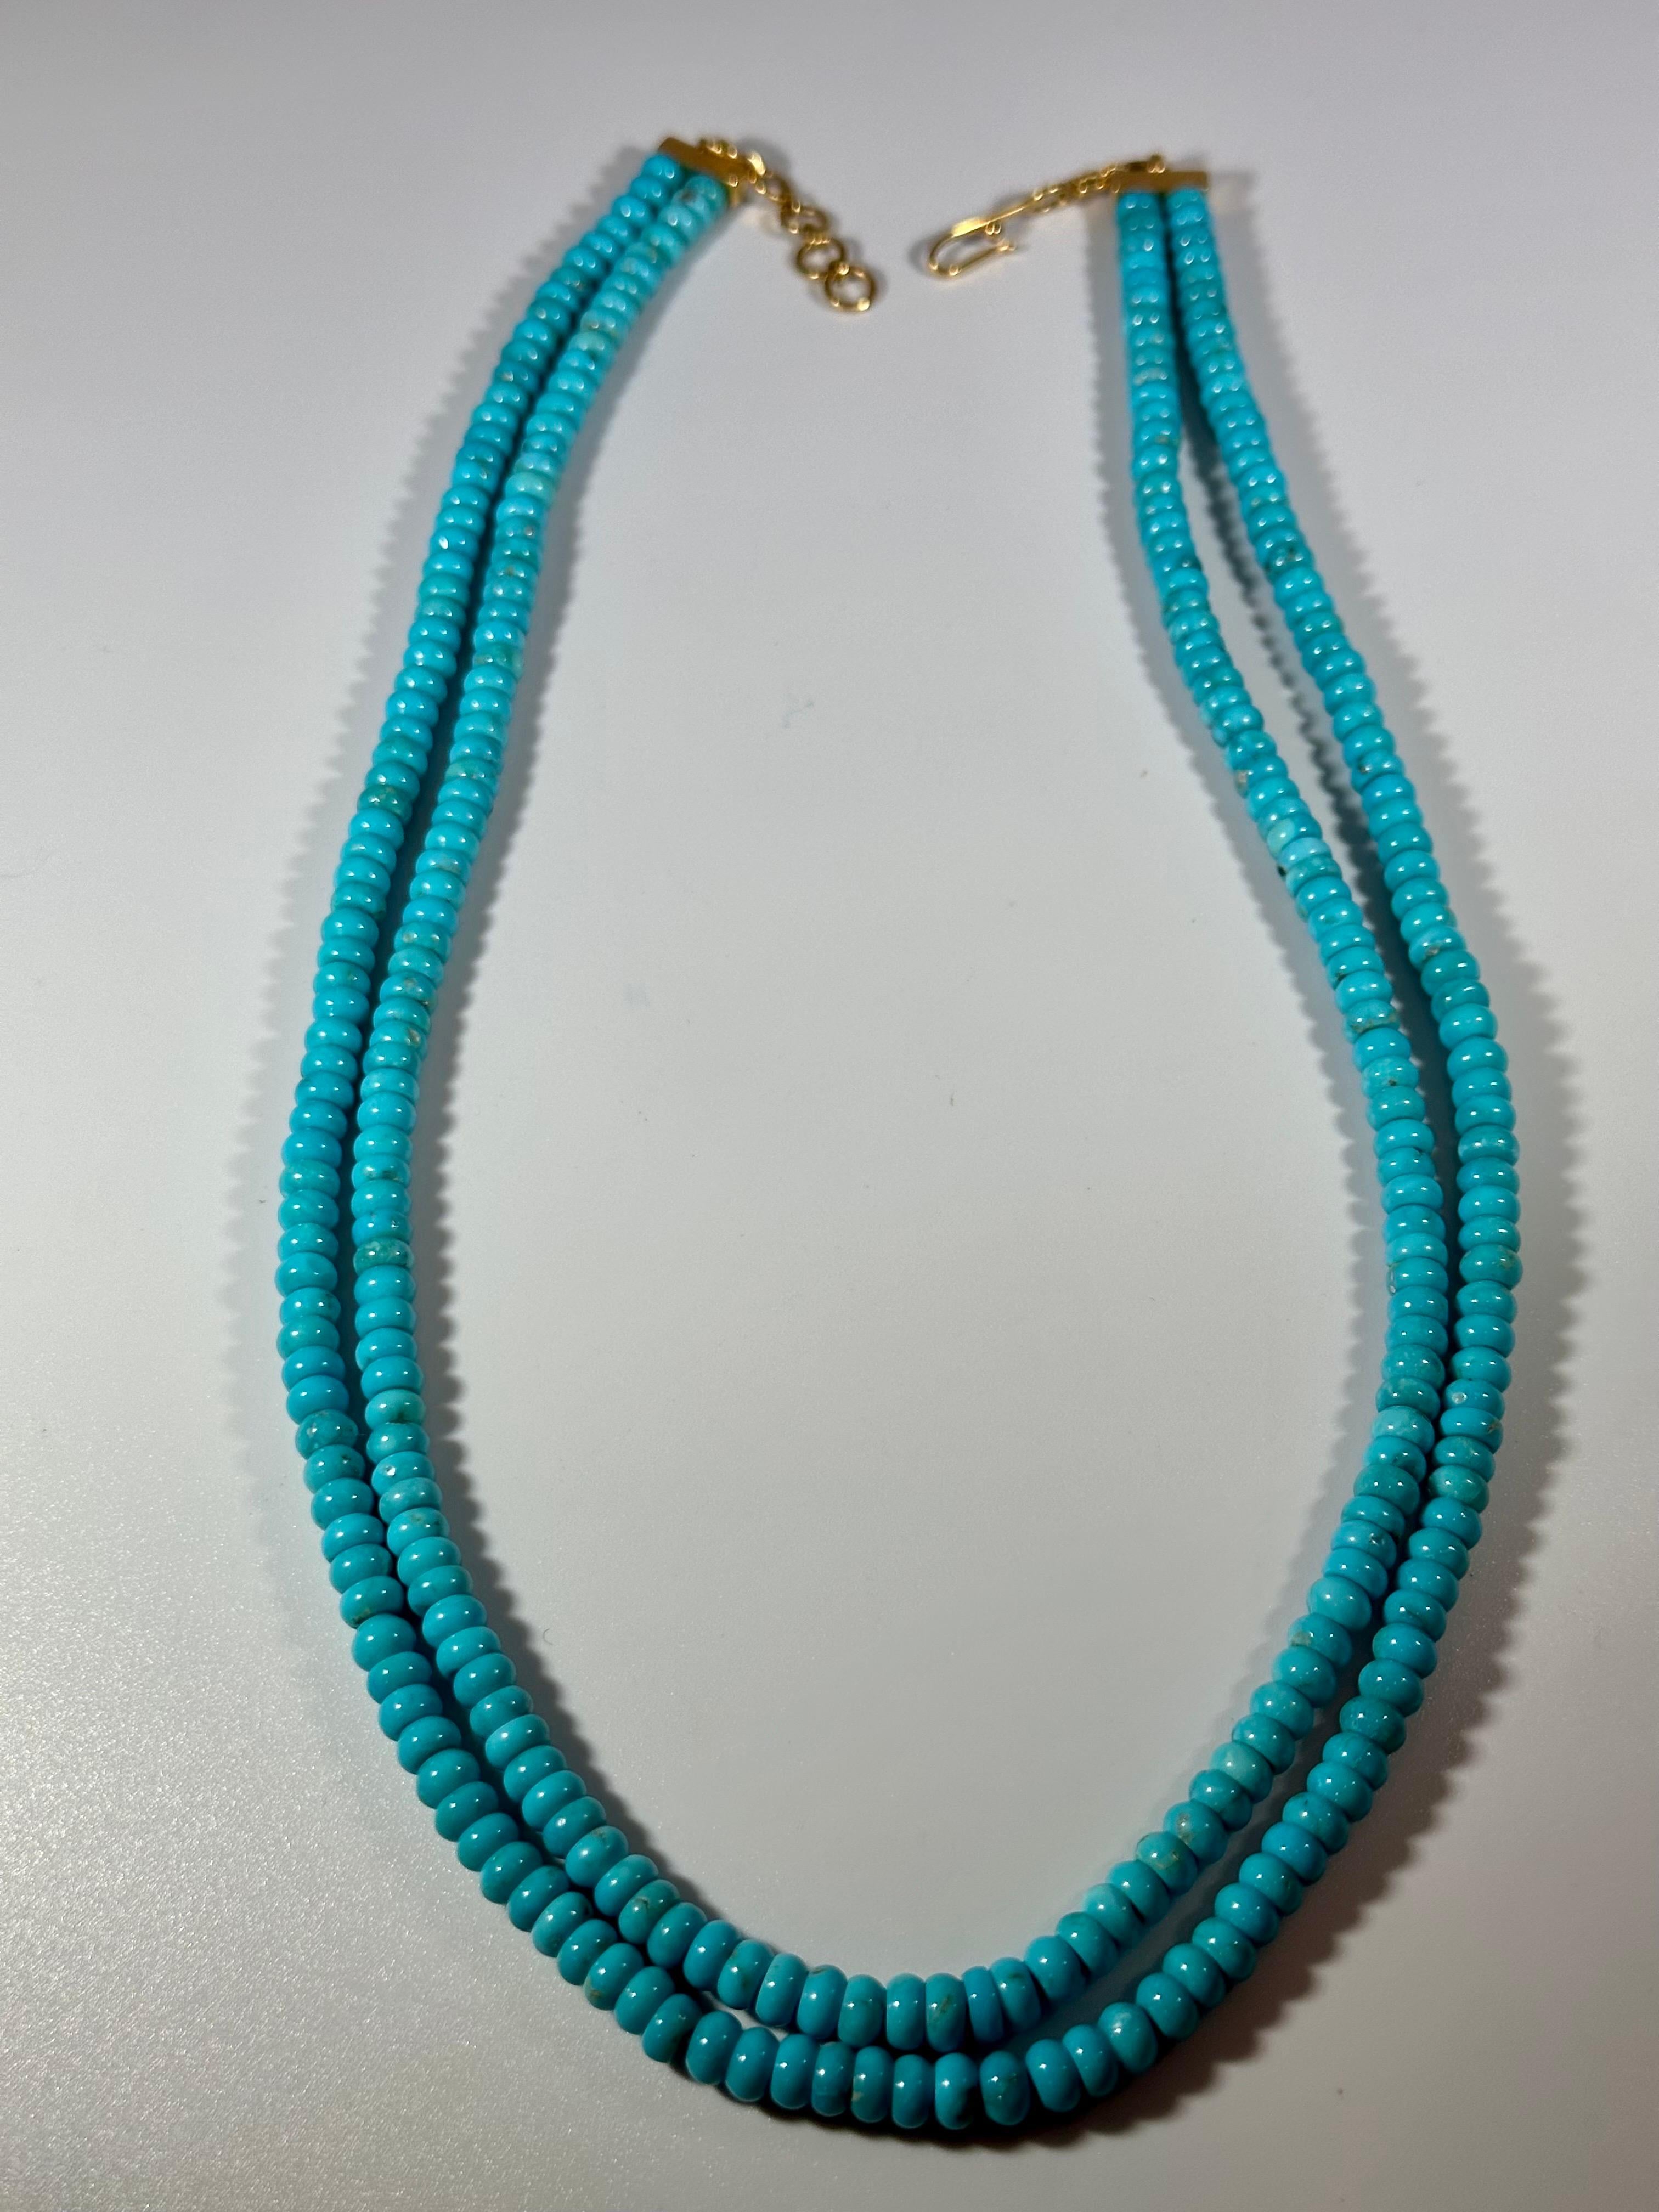 215 Carat Natural Sleeping Beauty Turquoise Necklace, Two Strand 14 Karat Gold For Sale 5